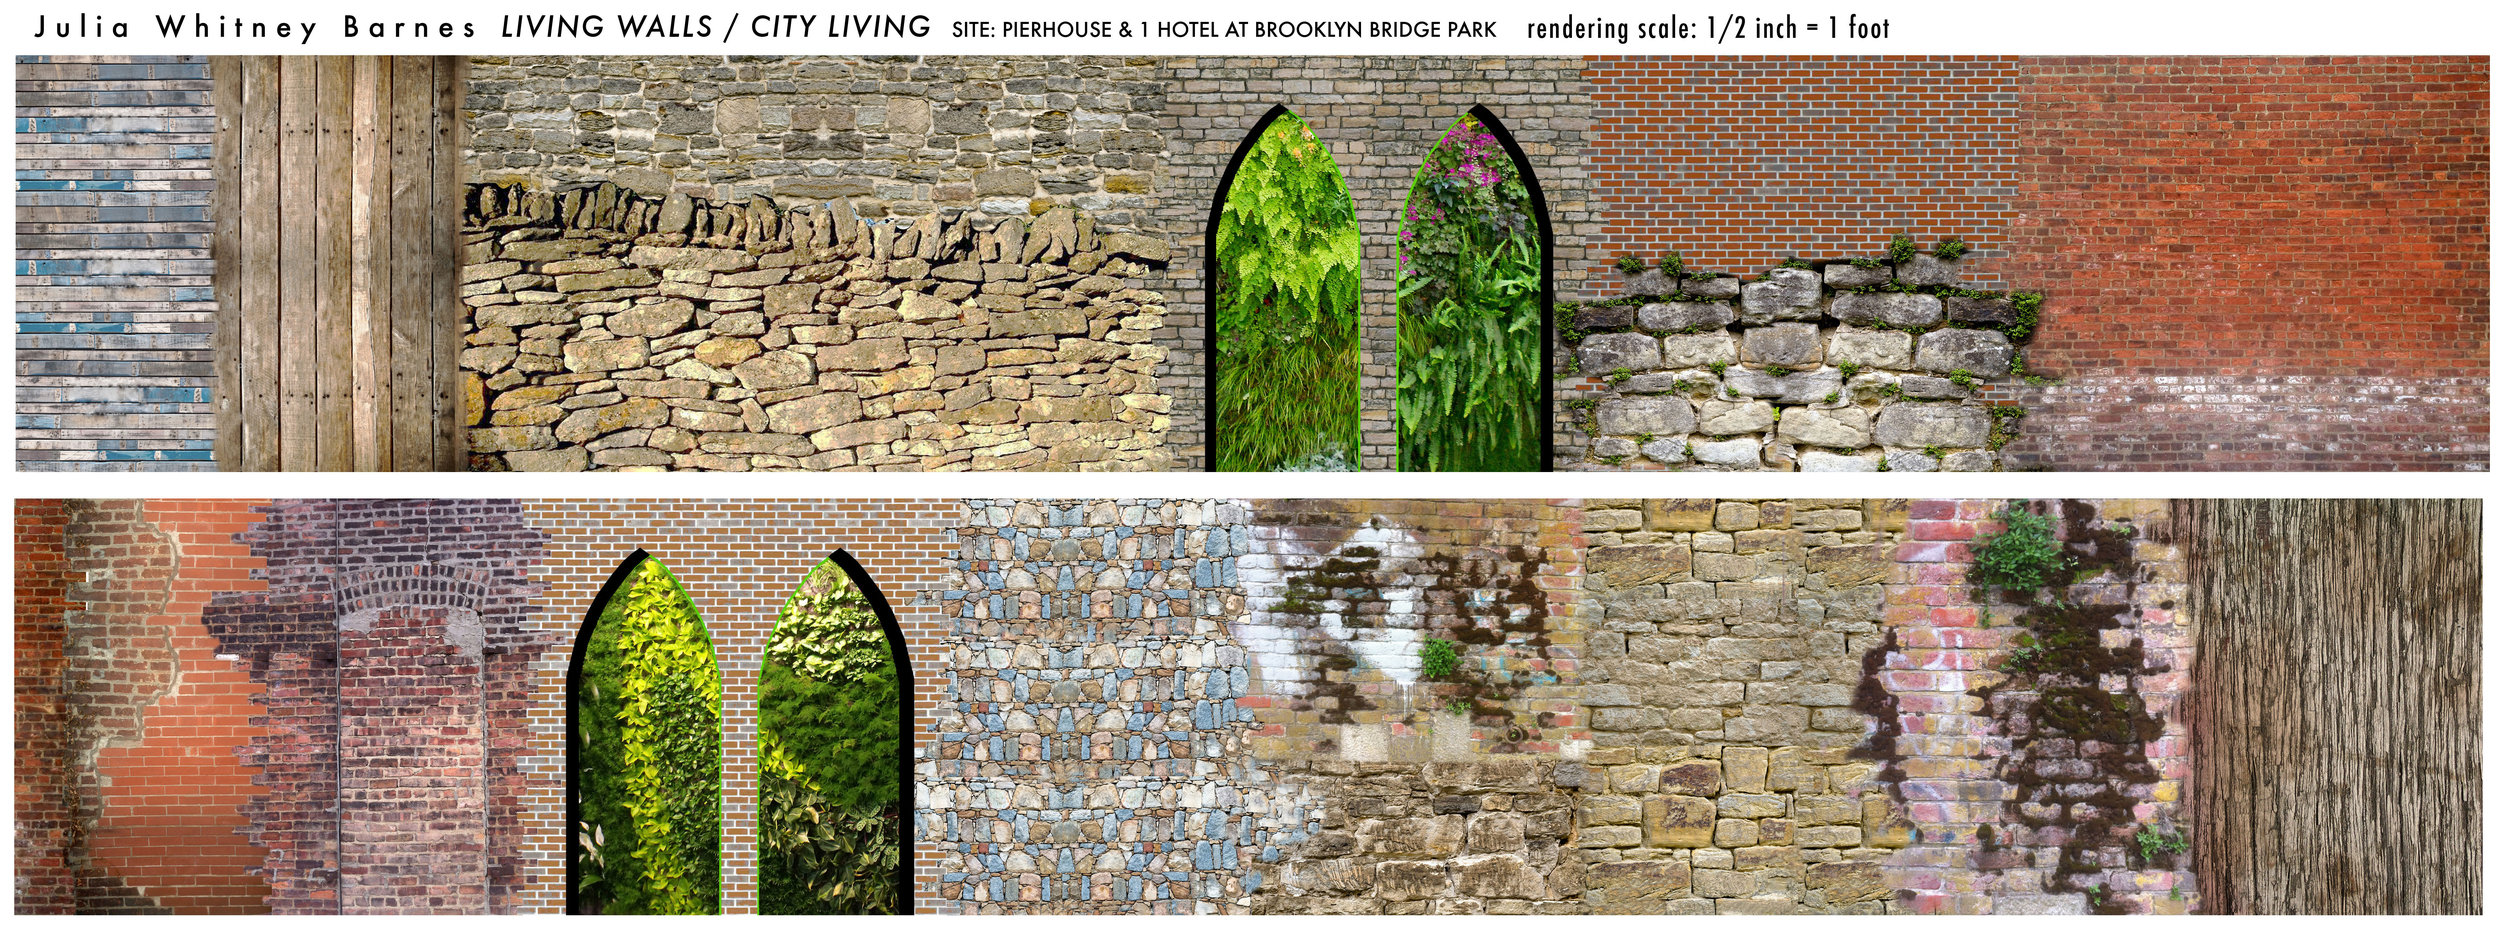 Living Walls, City Living  Mural (Proposed)